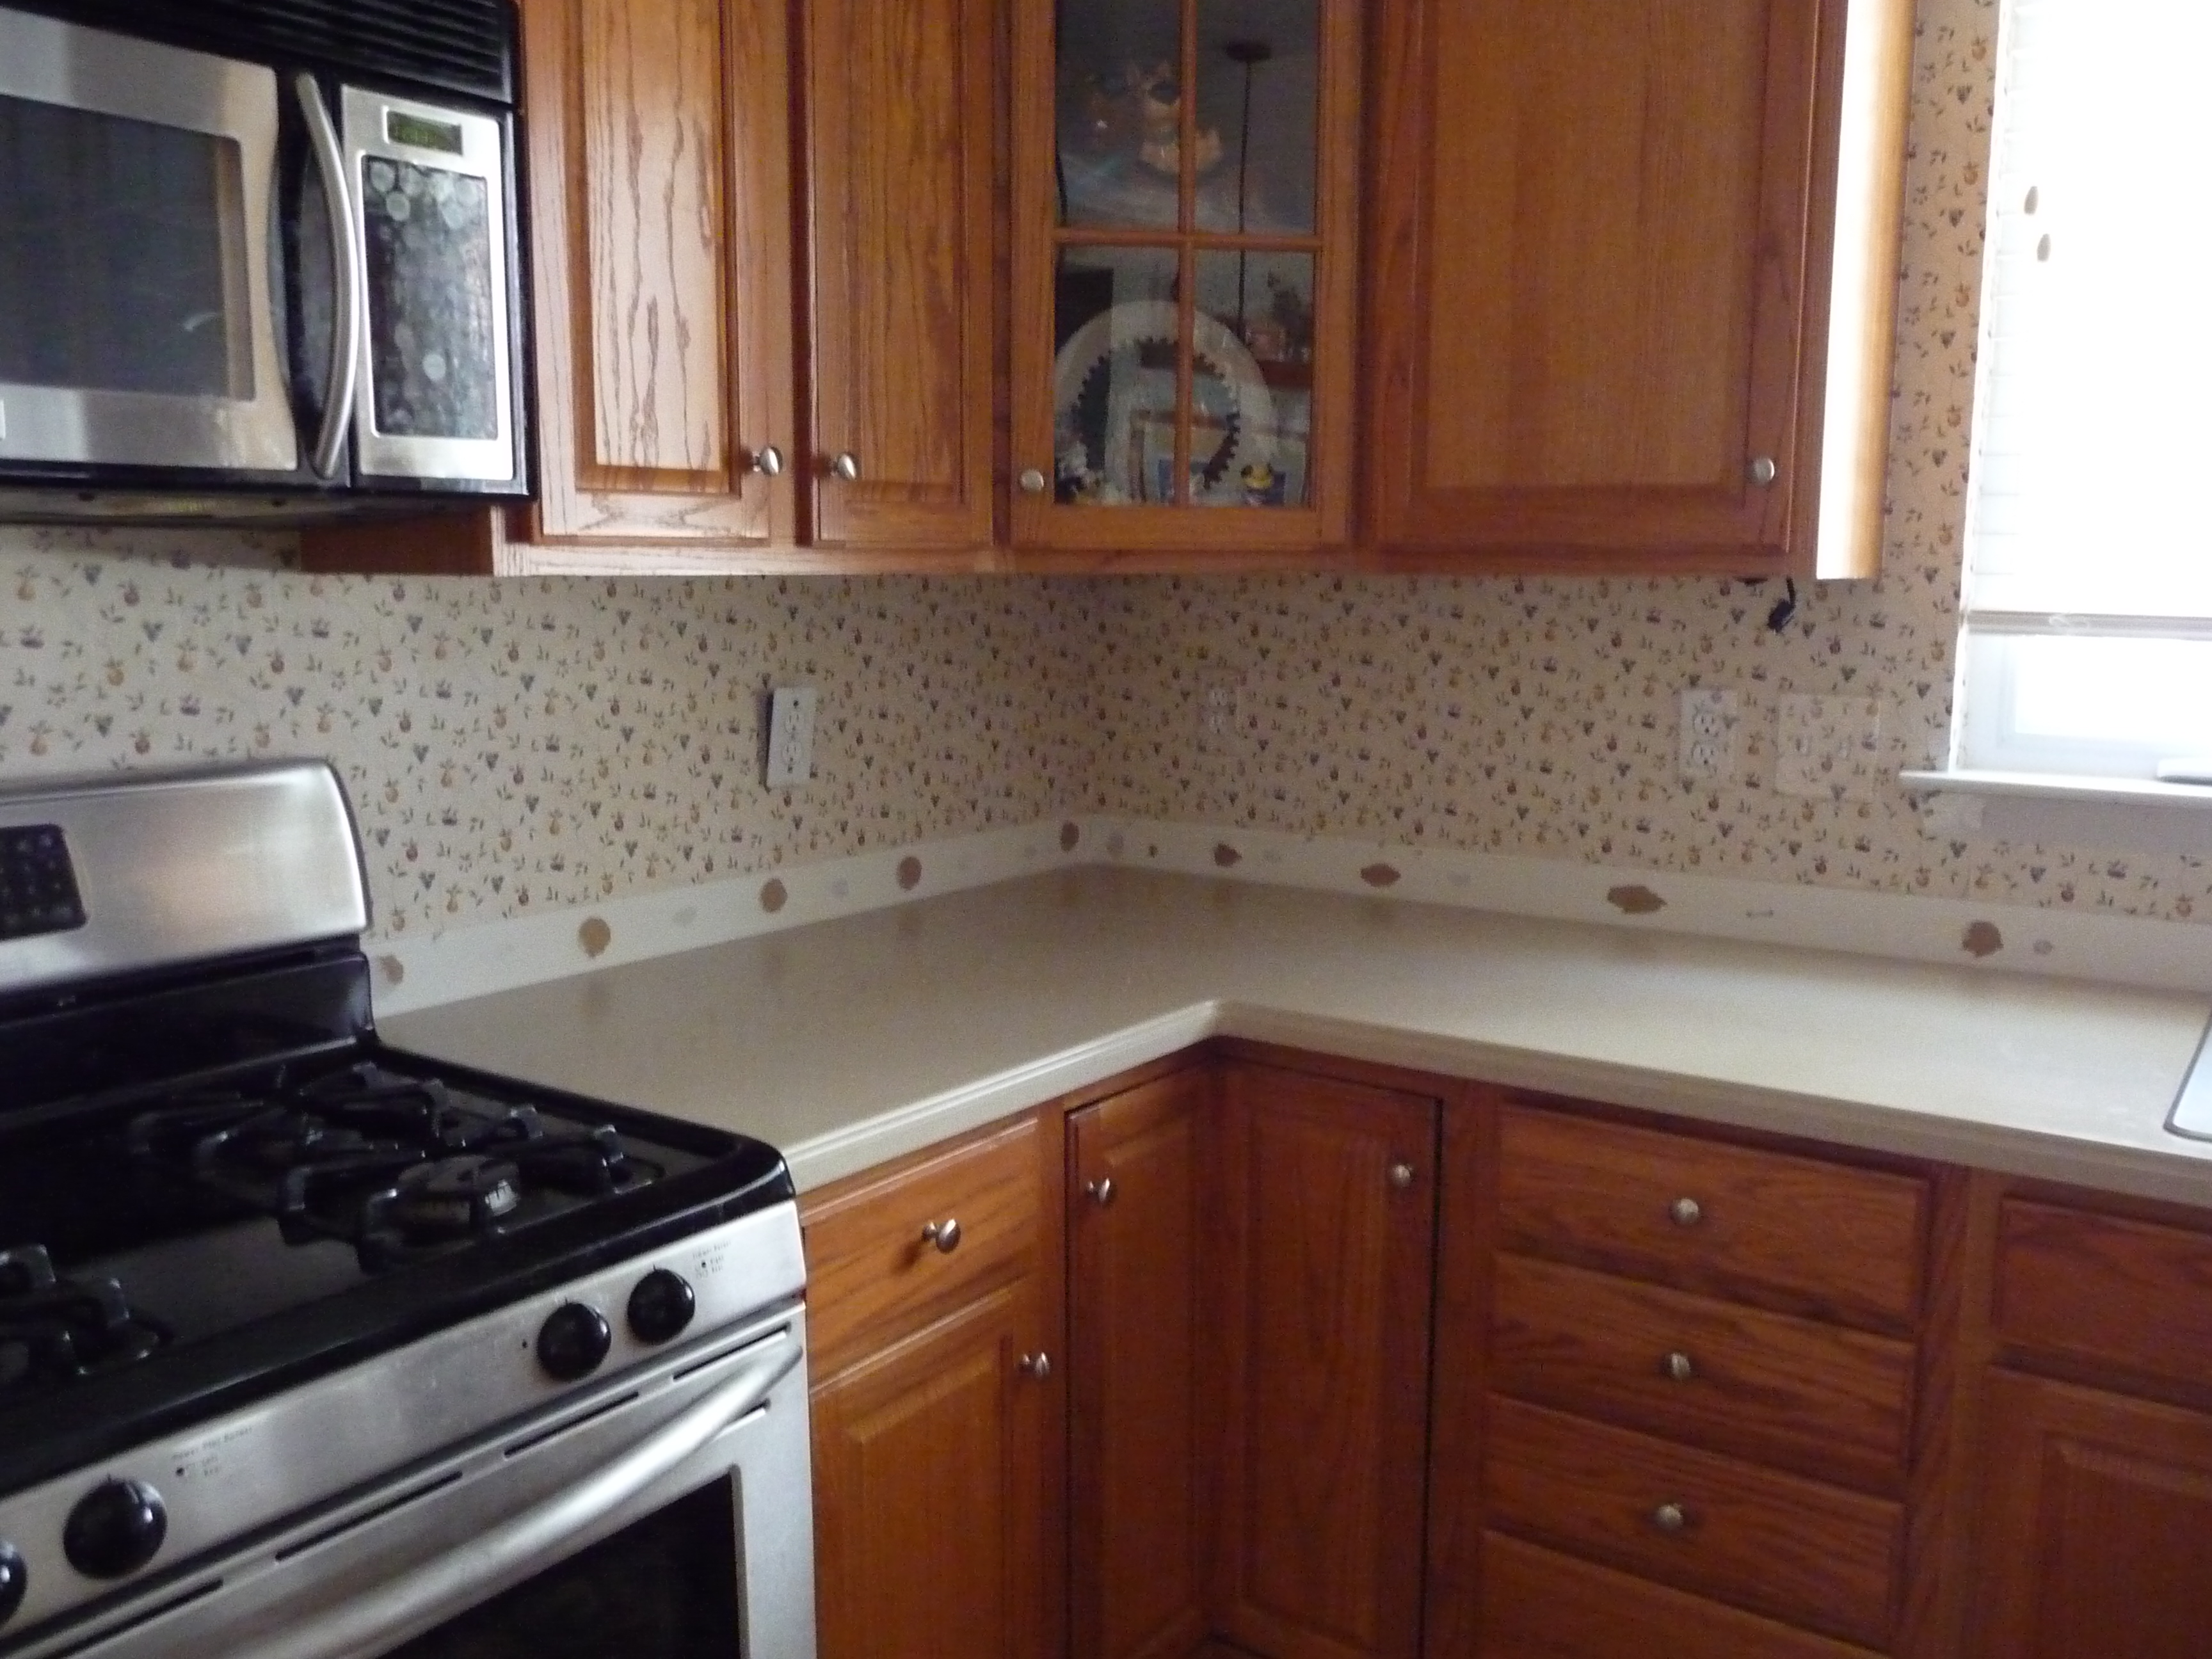 Free Download New Kitchen Backsplash With Decorative Stone Before Picture 3456x2592 For Your Desktop